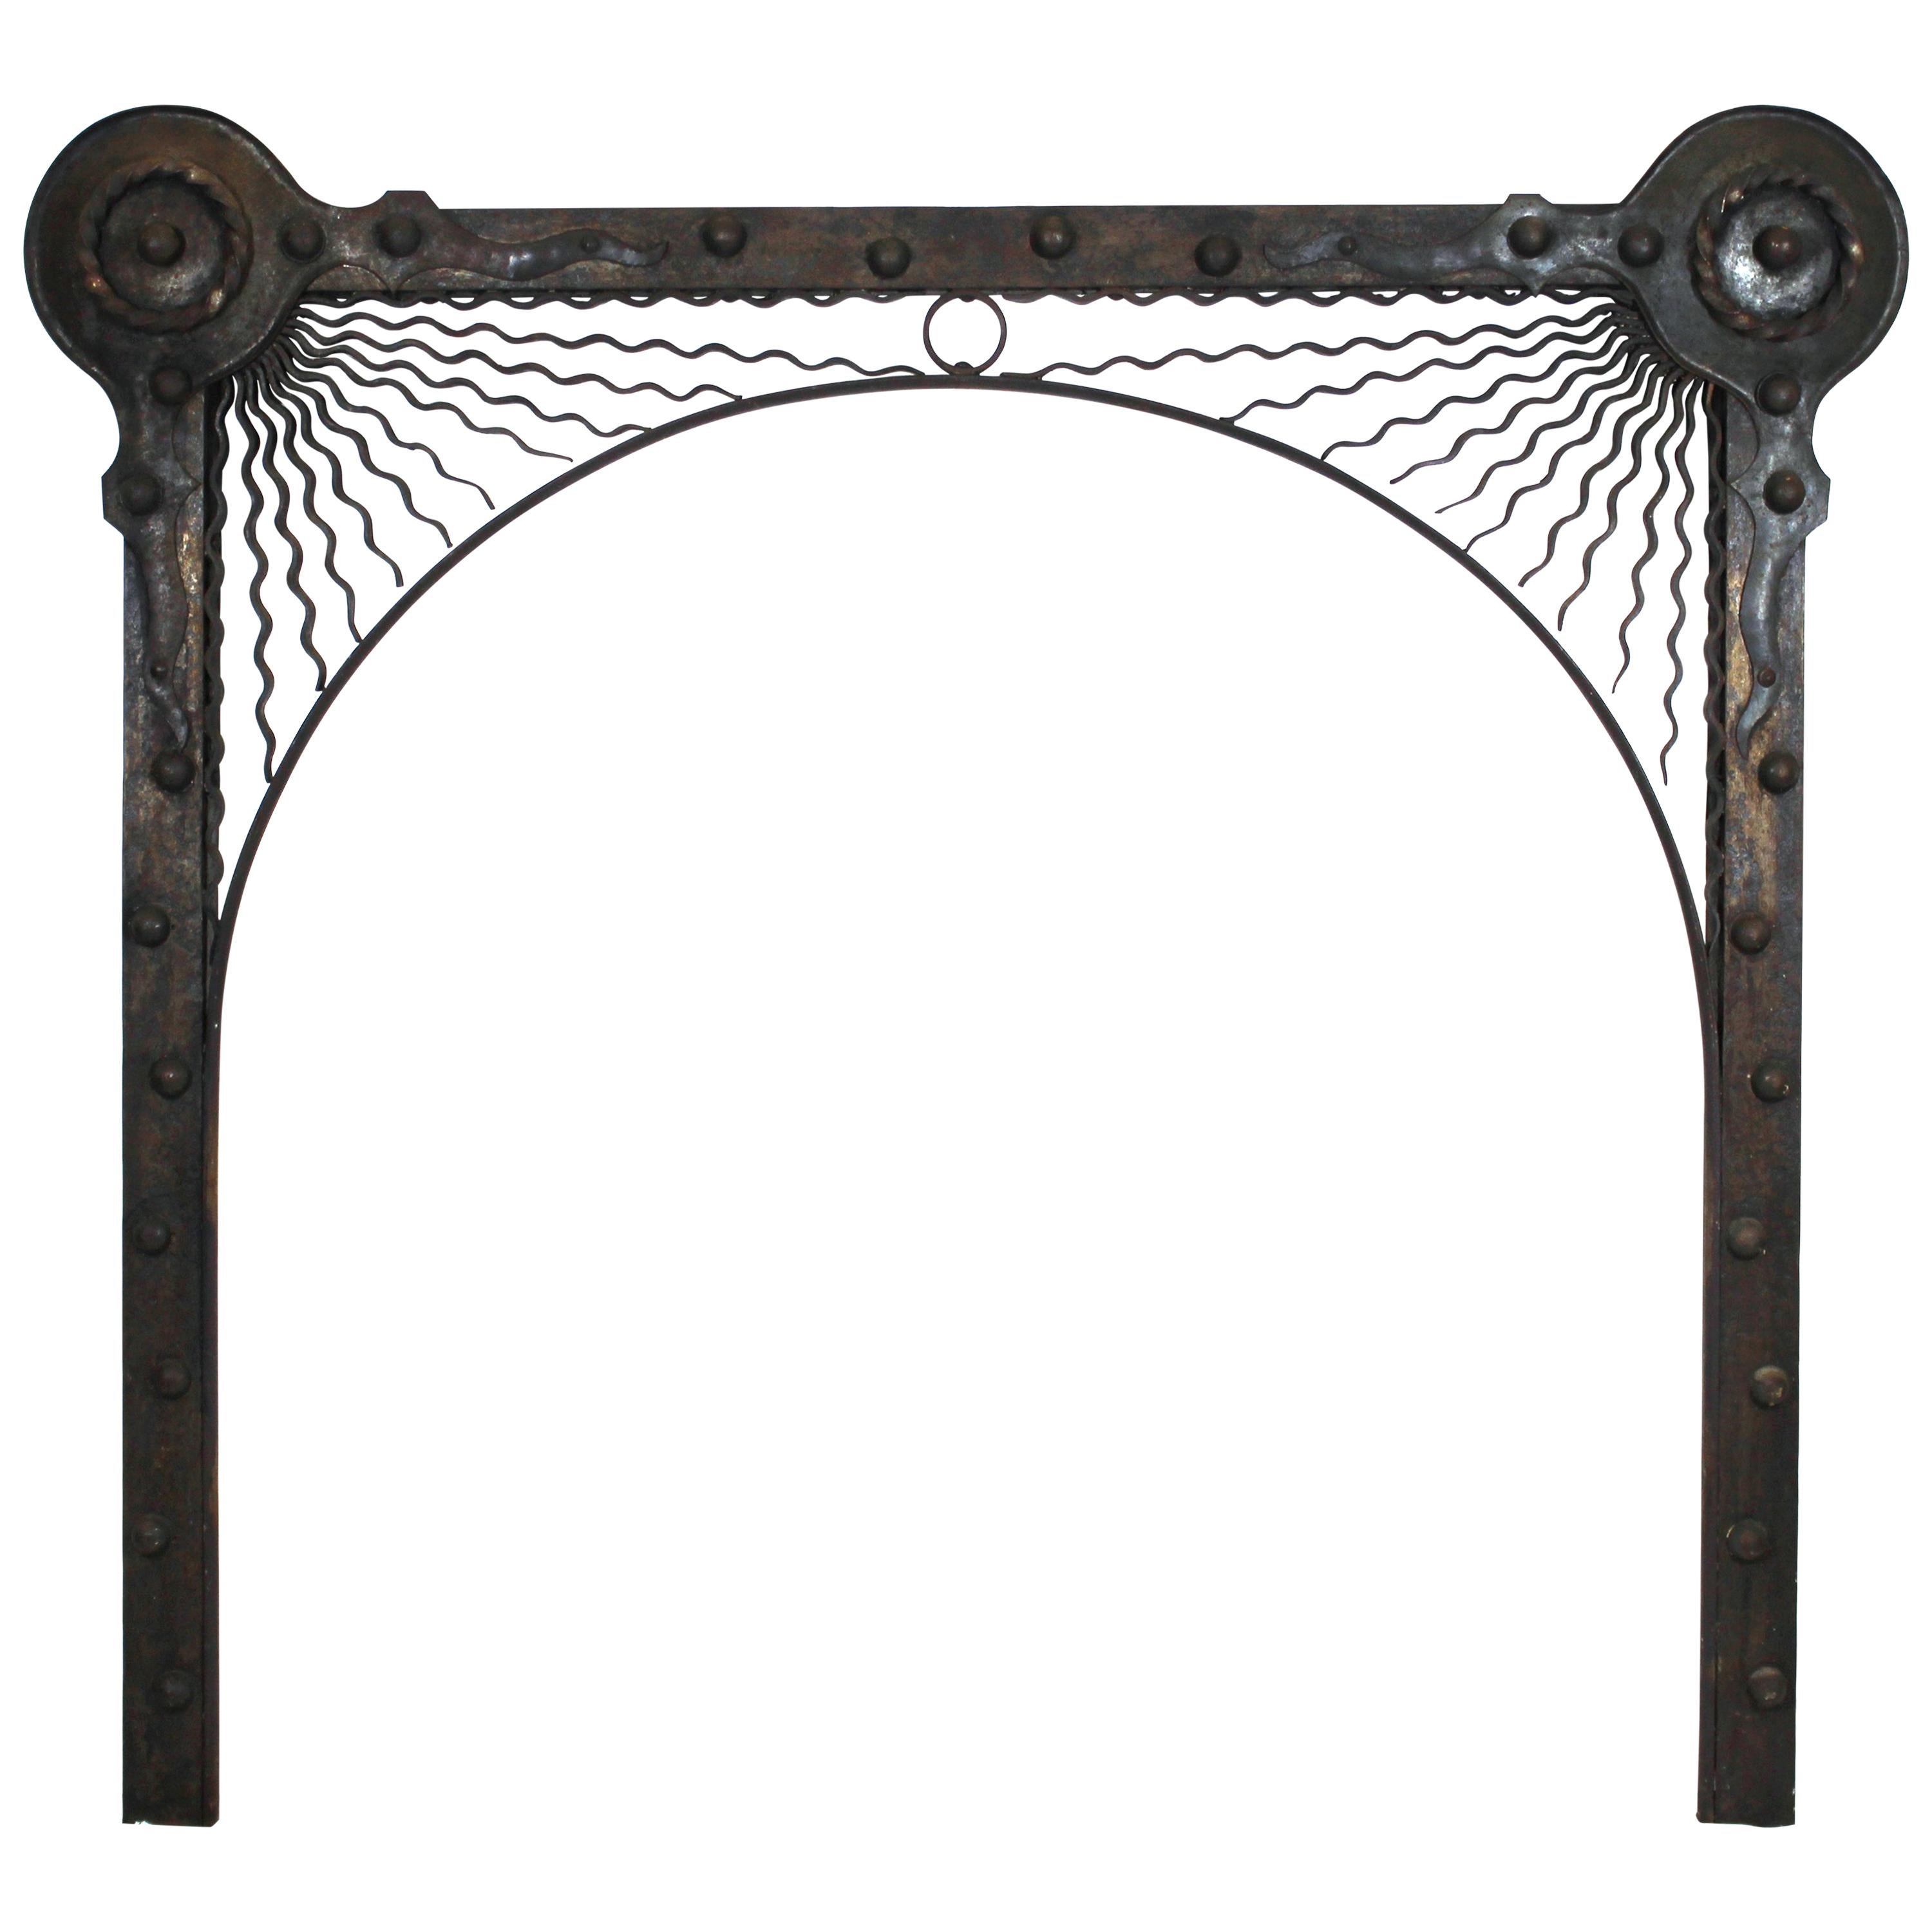 German Aesthetic Movement Fireplace Surround in Handwrought Iron